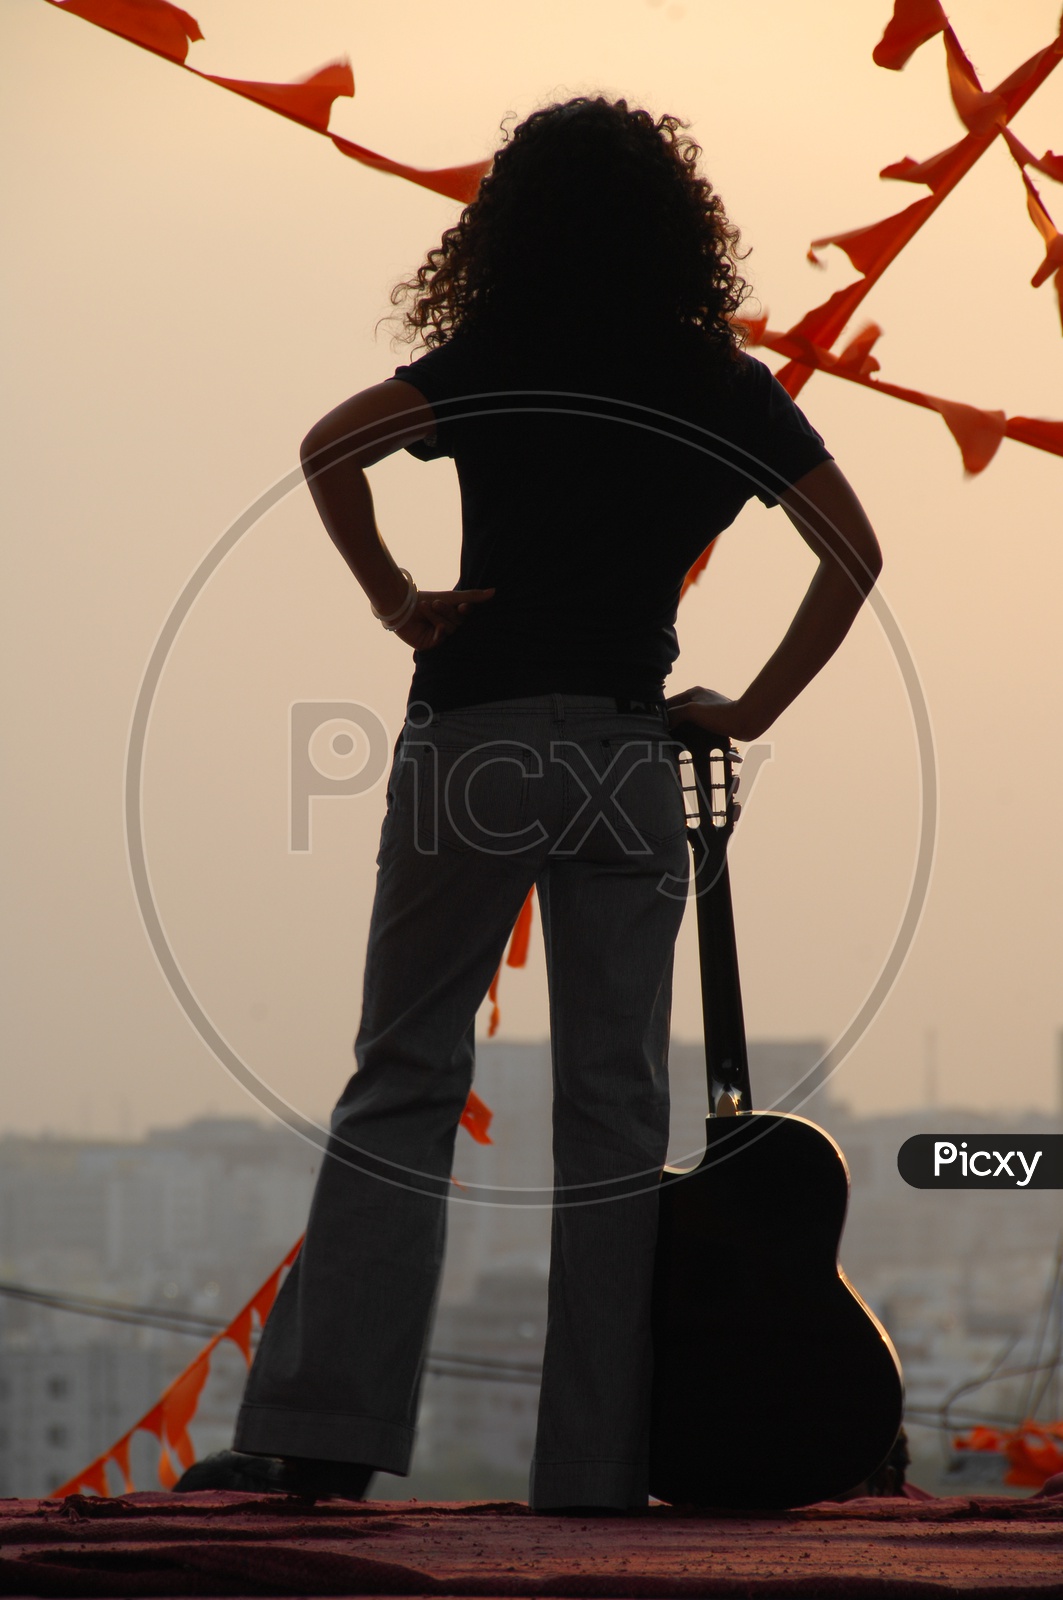 Silhouette of Woman Enjoying Evening Sunshine With a Guitar